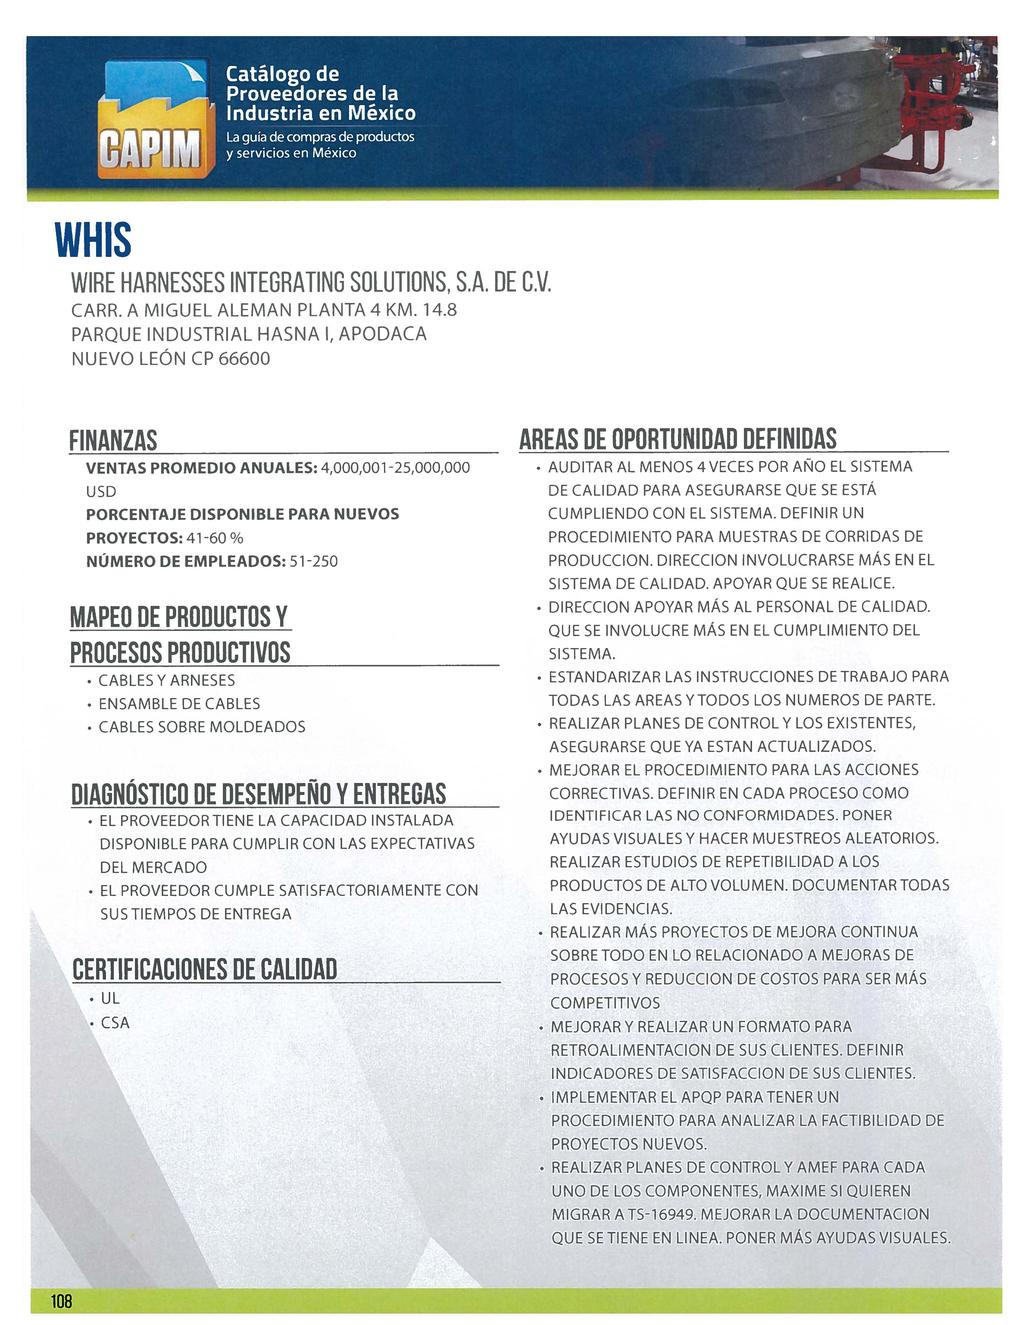 WHIS WIRE HARNESSES INTEGRATING SOLUTIONS, S.A. DE C.V. CARR. A MIGUEL ALEMAN PLANTA 4 KM. 14.